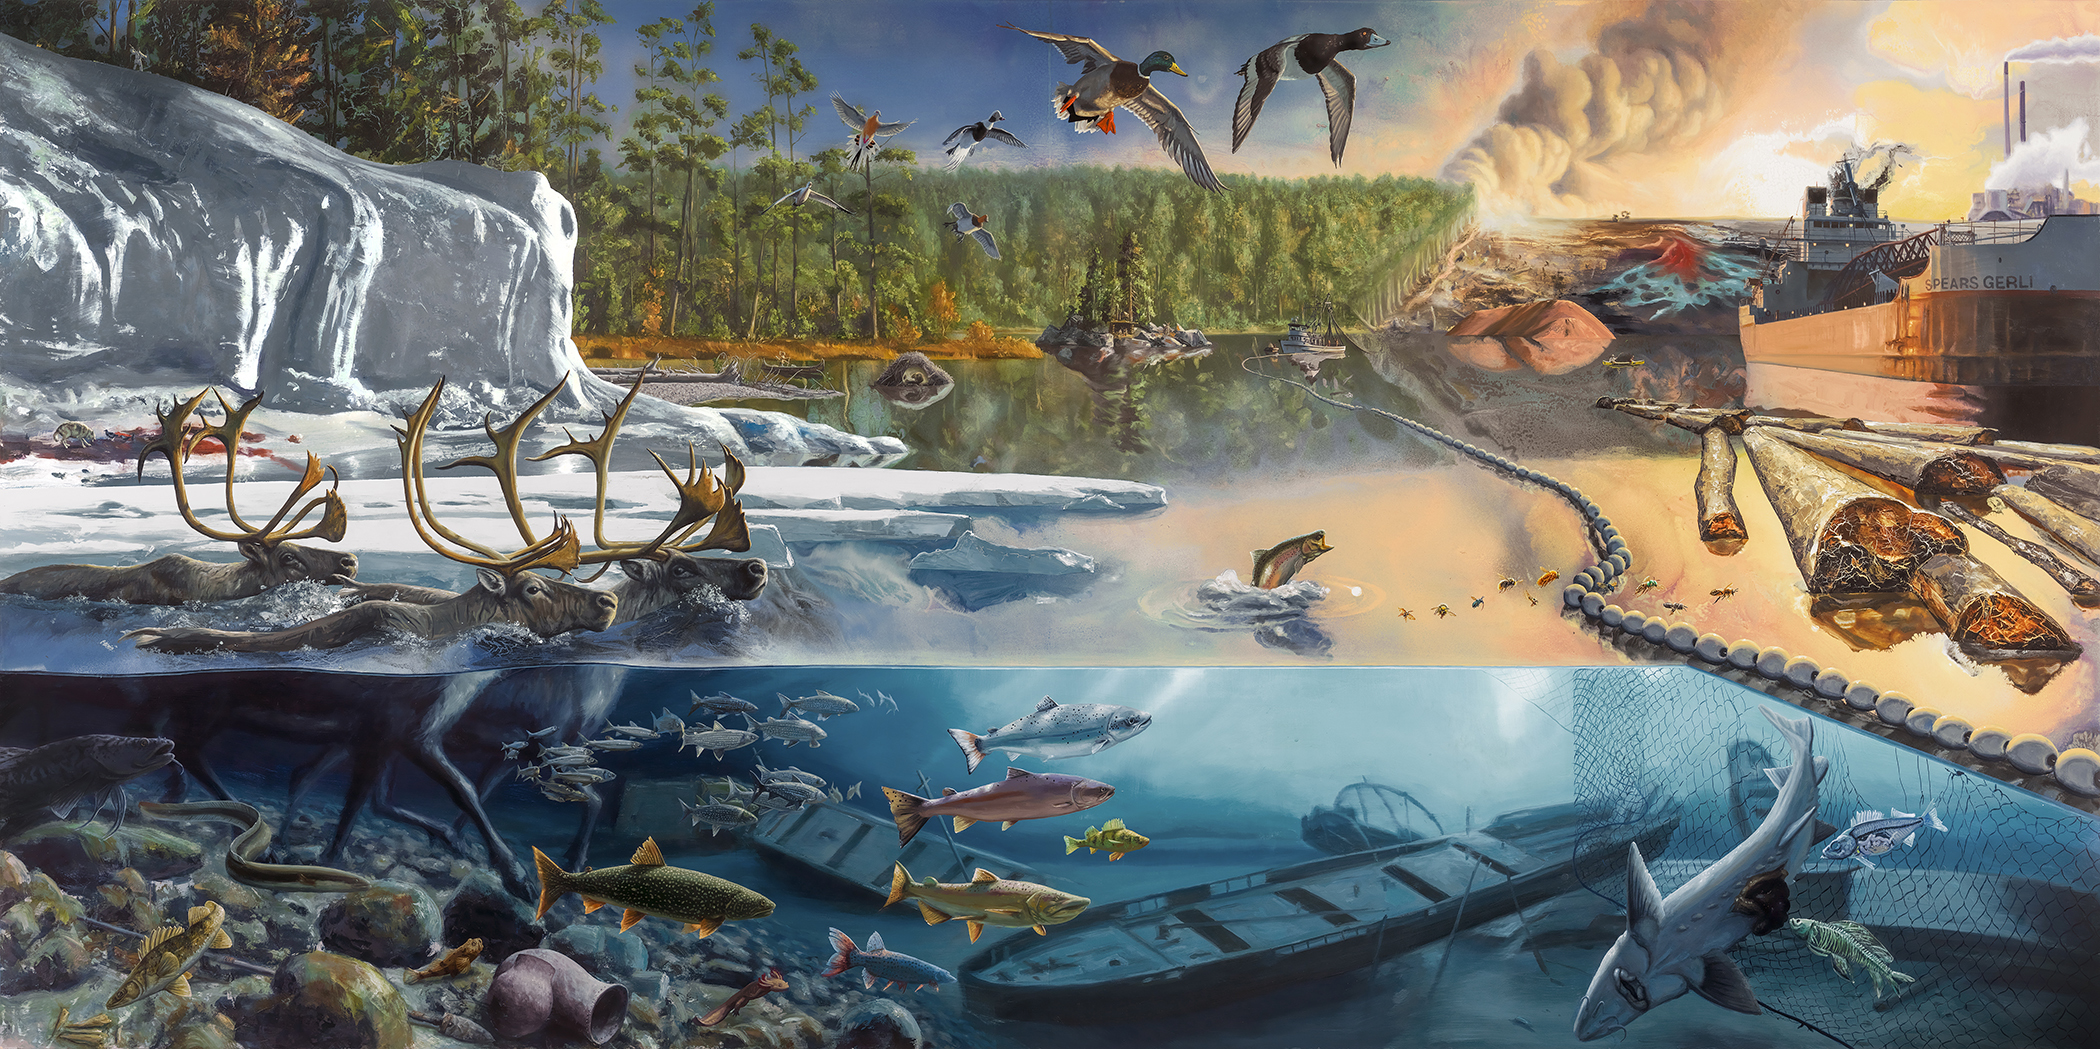 Alexis Rockman, Cascade (2015). Oil and alkyd on wood panel. Dimensions: 72” x 144”. ©2015 Alexis Rockman. Courtesy of the artist. Rockman’s mural-sized painting explores the Great Lakes’ past, present and future – from last ice age to colonial era virgin forests to deforestation from agricultural, industrial and urban development. Rockman asks: “The lakes contain 20% of Earth’s and 95% of our nation’s surface freshwater. They are ‘ground zero’ for the future when freshwater will be Earth’s most valuable asset. Yet they are neglected, exploited, and further stressed by climate change. Can we face the reality of our actions and the consequences of complacency?”